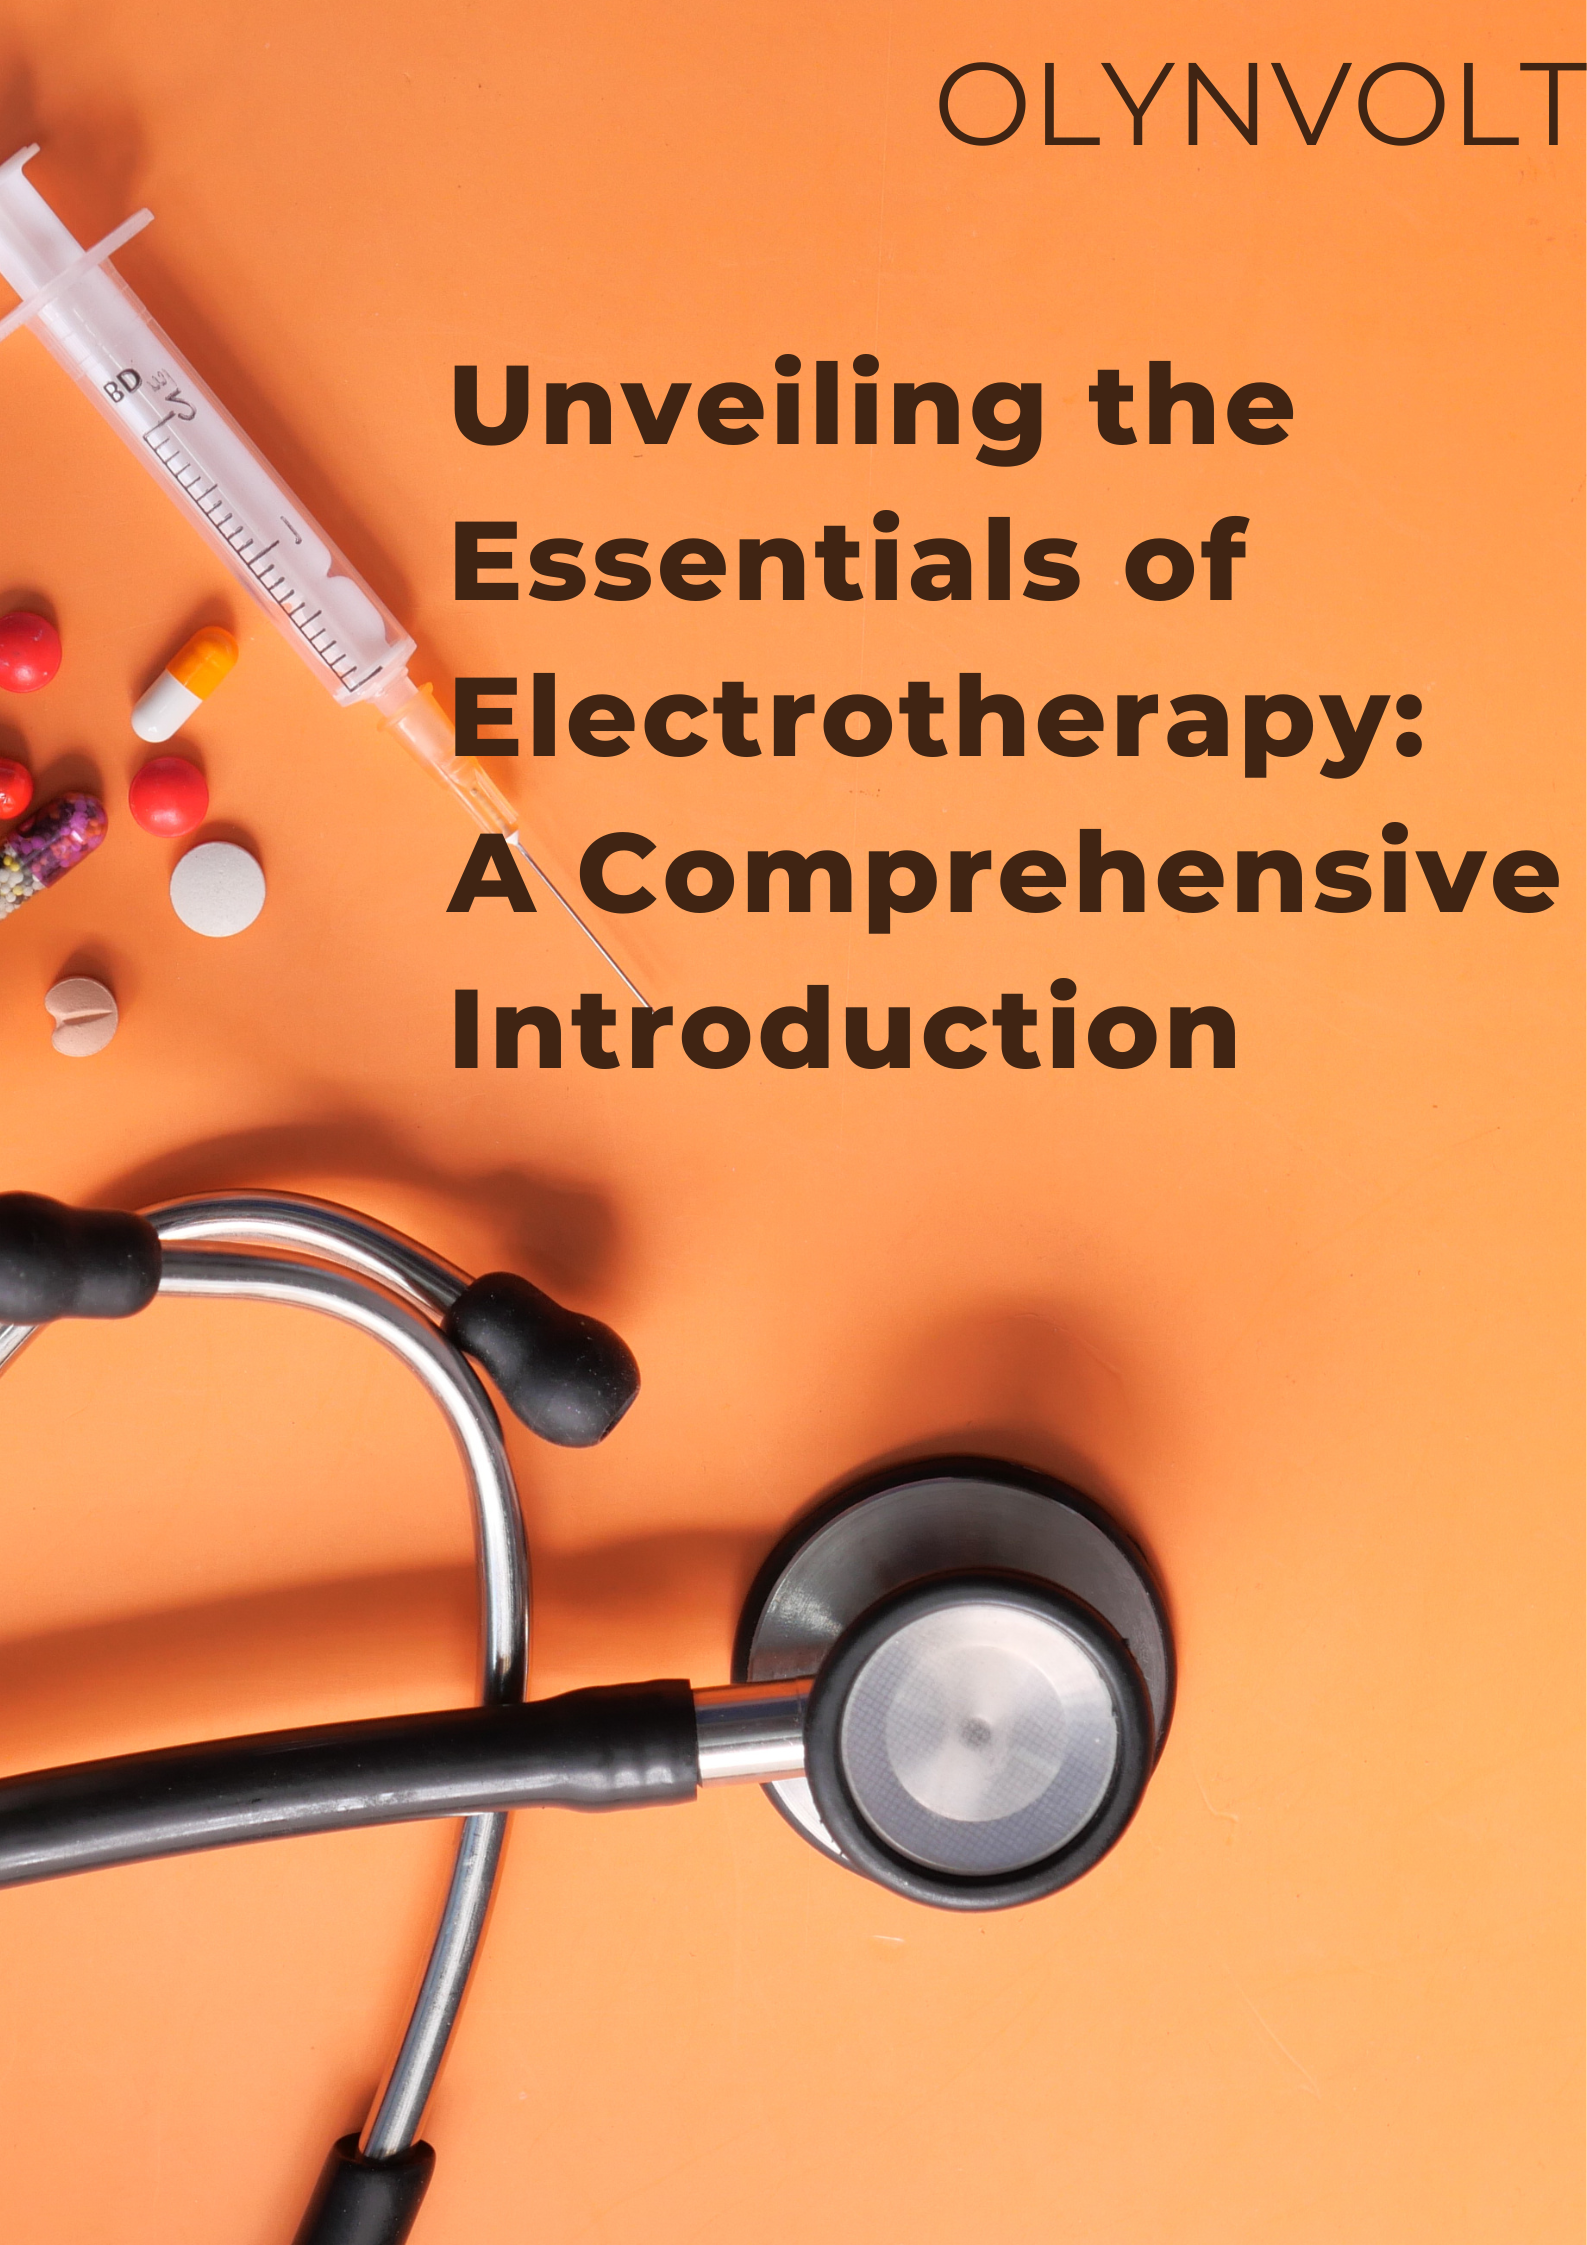 Understanding the Fundamentals of Electrotherapy